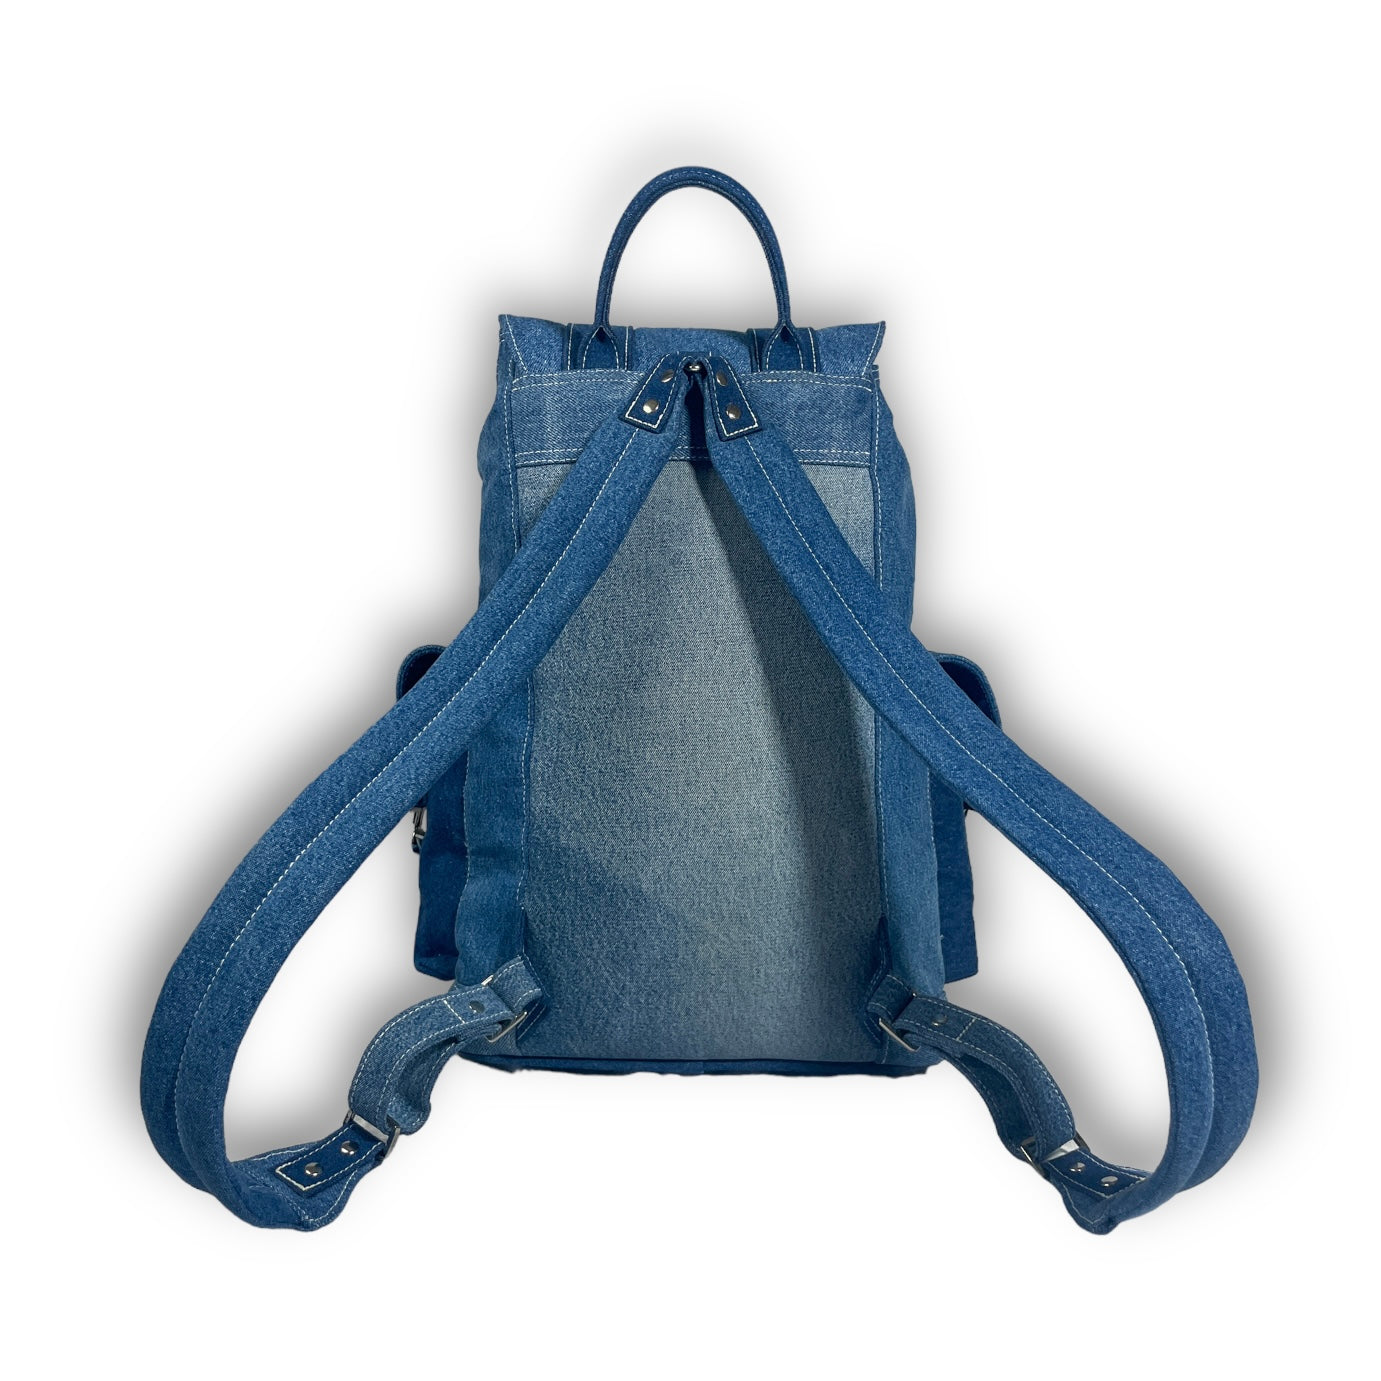 Shades of Blue Backpack (Archived Dreams Collab)